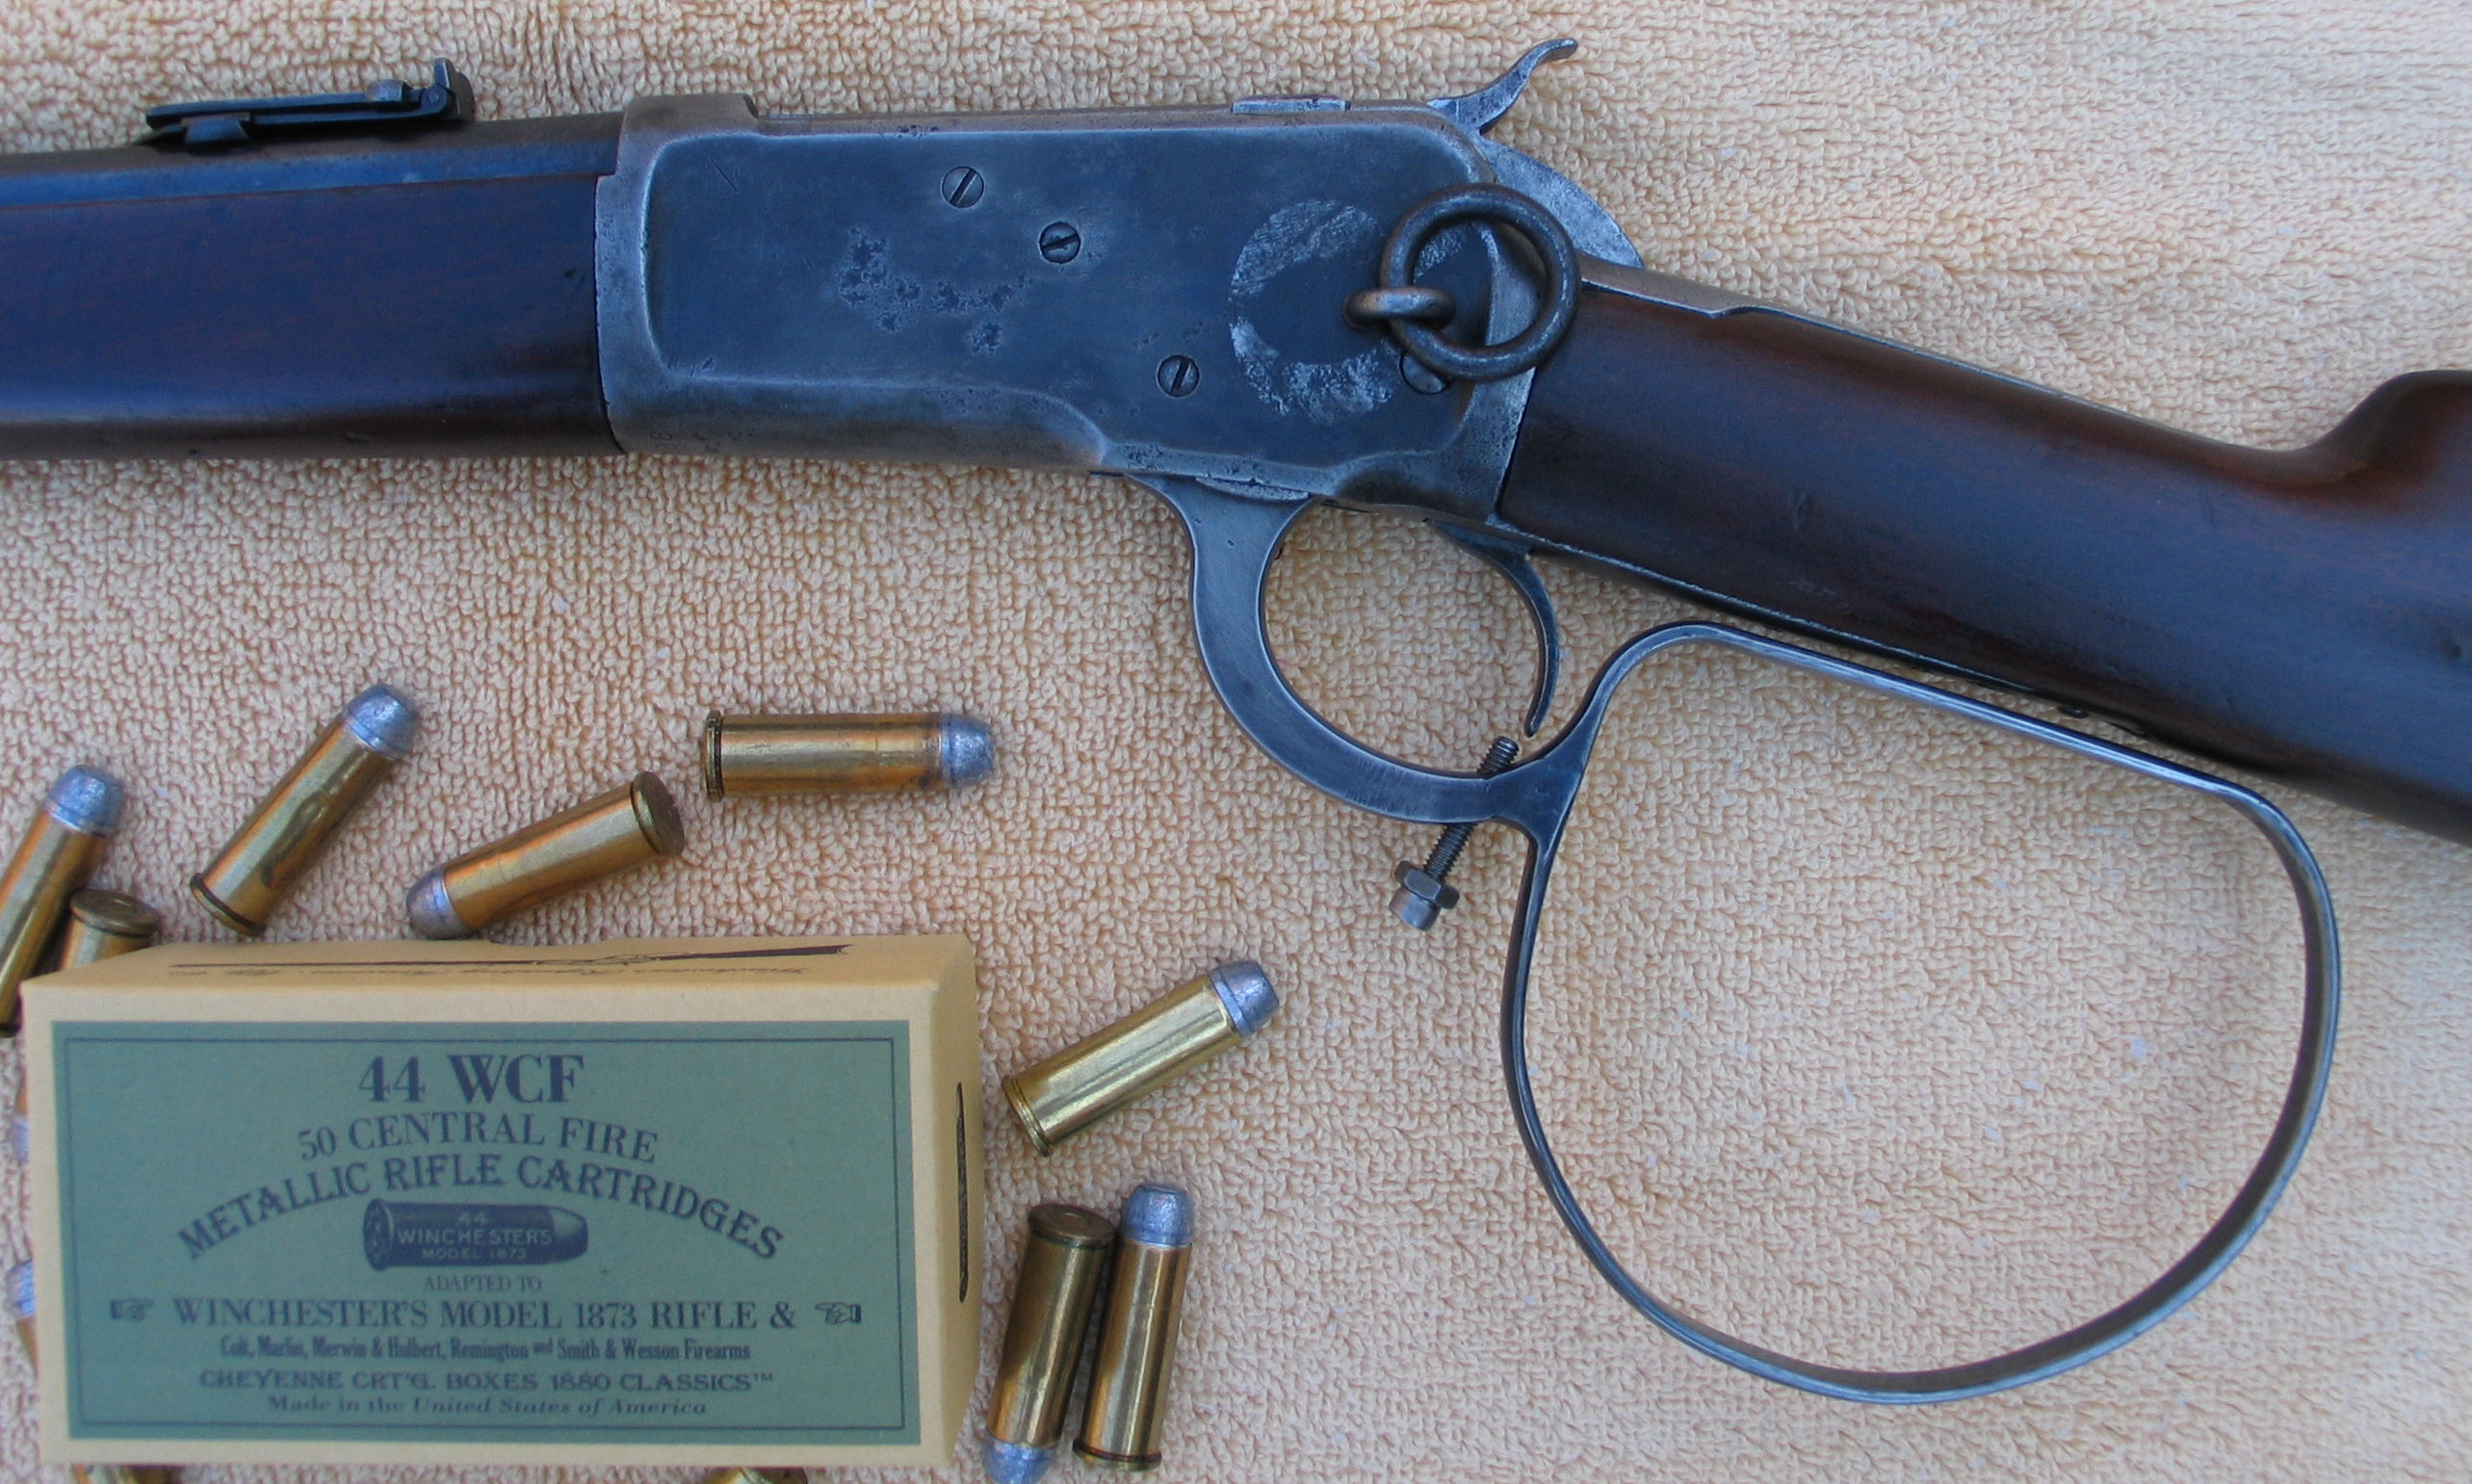 Old Rifleman's Rifle - Well used